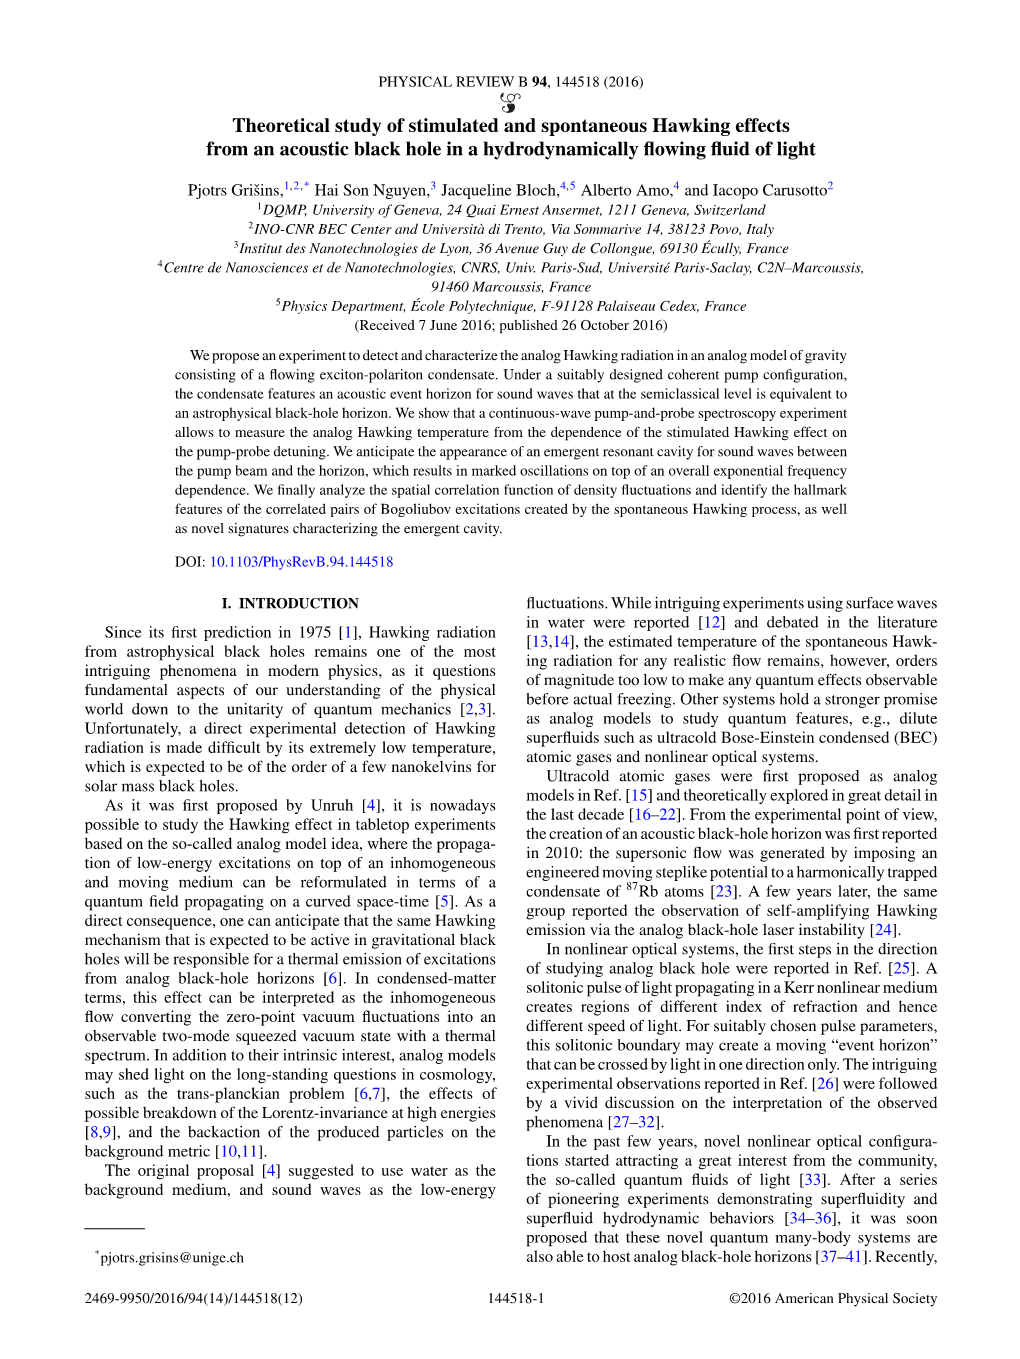 Theoretical Study of Stimulated and Spontaneous Hawking Effects from an Acoustic Black Hole in a Hydrodynamically Flowing Fluid